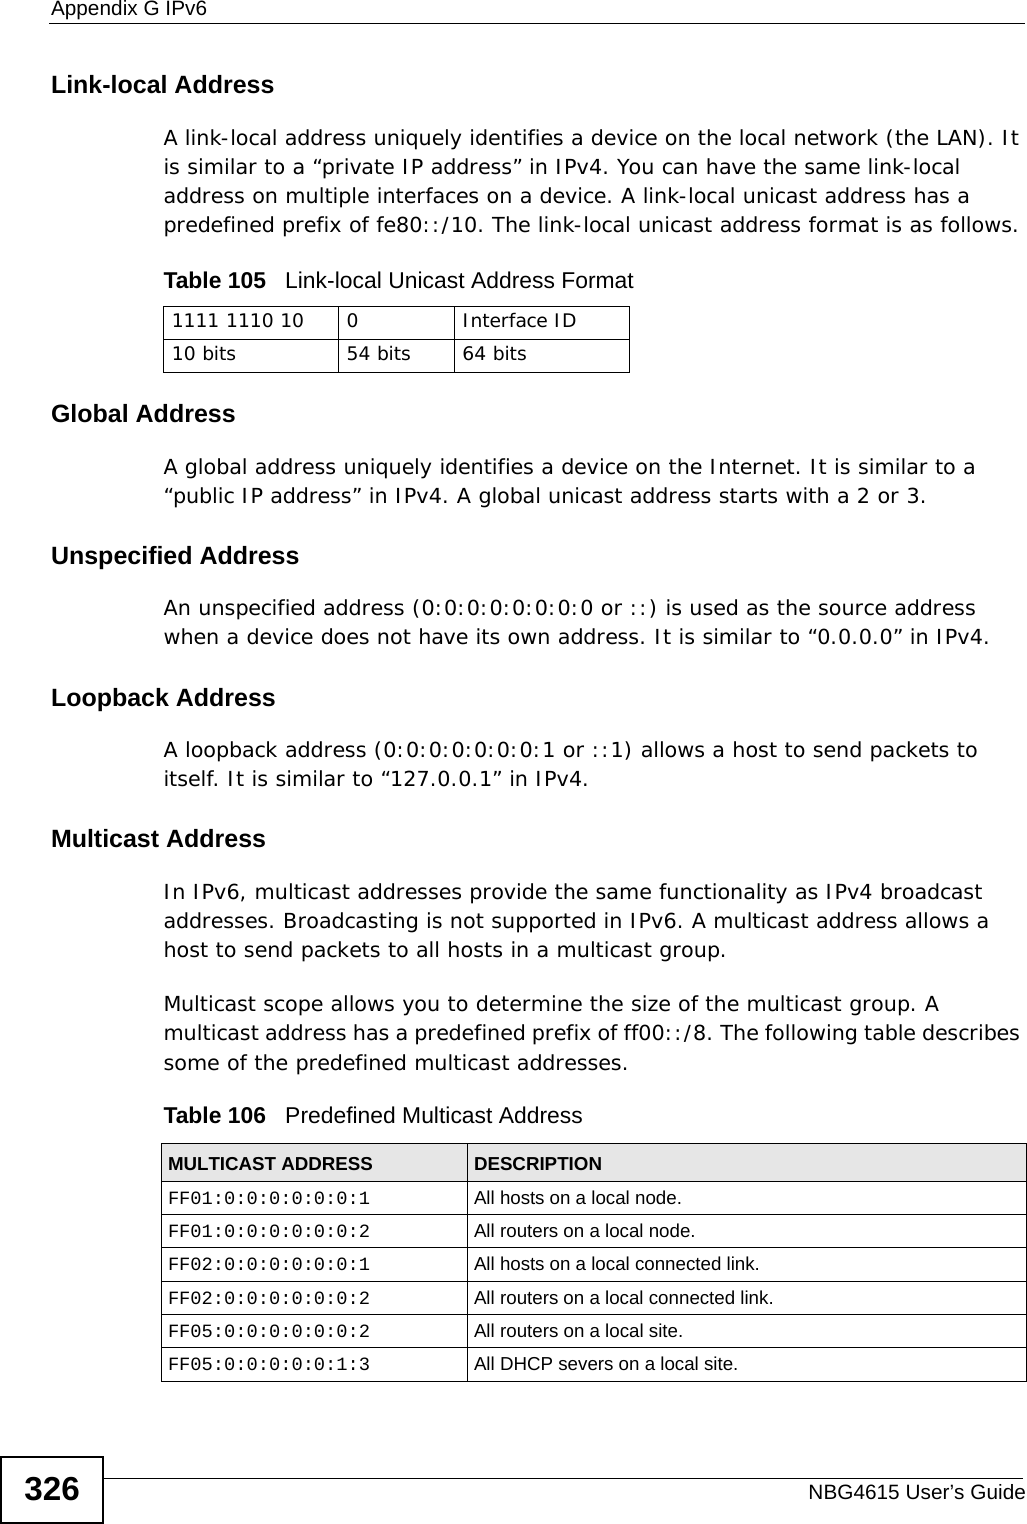 Appendix G IPv6NBG4615 User’s Guide326Link-local AddressA link-local address uniquely identifies a device on the local network (the LAN). It is similar to a “private IP address” in IPv4. You can have the same link-local address on multiple interfaces on a device. A link-local unicast address has a predefined prefix of fe80::/10. The link-local unicast address format is as follows.Table 105   Link-local Unicast Address FormatGlobal AddressA global address uniquely identifies a device on the Internet. It is similar to a “public IP address” in IPv4. A global unicast address starts with a 2 or 3. Unspecified AddressAn unspecified address (0:0:0:0:0:0:0:0 or ::) is used as the source address when a device does not have its own address. It is similar to “0.0.0.0” in IPv4.Loopback AddressA loopback address (0:0:0:0:0:0:0:1 or ::1) allows a host to send packets to itself. It is similar to “127.0.0.1” in IPv4.Multicast AddressIn IPv6, multicast addresses provide the same functionality as IPv4 broadcast addresses. Broadcasting is not supported in IPv6. A multicast address allows a host to send packets to all hosts in a multicast group. Multicast scope allows you to determine the size of the multicast group. A multicast address has a predefined prefix of ff00::/8. The following table describes some of the predefined multicast addresses. 1111 1110 10 0 Interface ID10 bits 54 bits 64 bitsTable 106   Predefined Multicast AddressMULTICAST ADDRESS DESCRIPTIONFF01:0:0:0:0:0:0:1 All hosts on a local node. FF01:0:0:0:0:0:0:2 All routers on a local node.FF02:0:0:0:0:0:0:1 All hosts on a local connected link.FF02:0:0:0:0:0:0:2 All routers on a local connected link.FF05:0:0:0:0:0:0:2 All routers on a local site. FF05:0:0:0:0:0:1:3 All DHCP severs on a local site. 